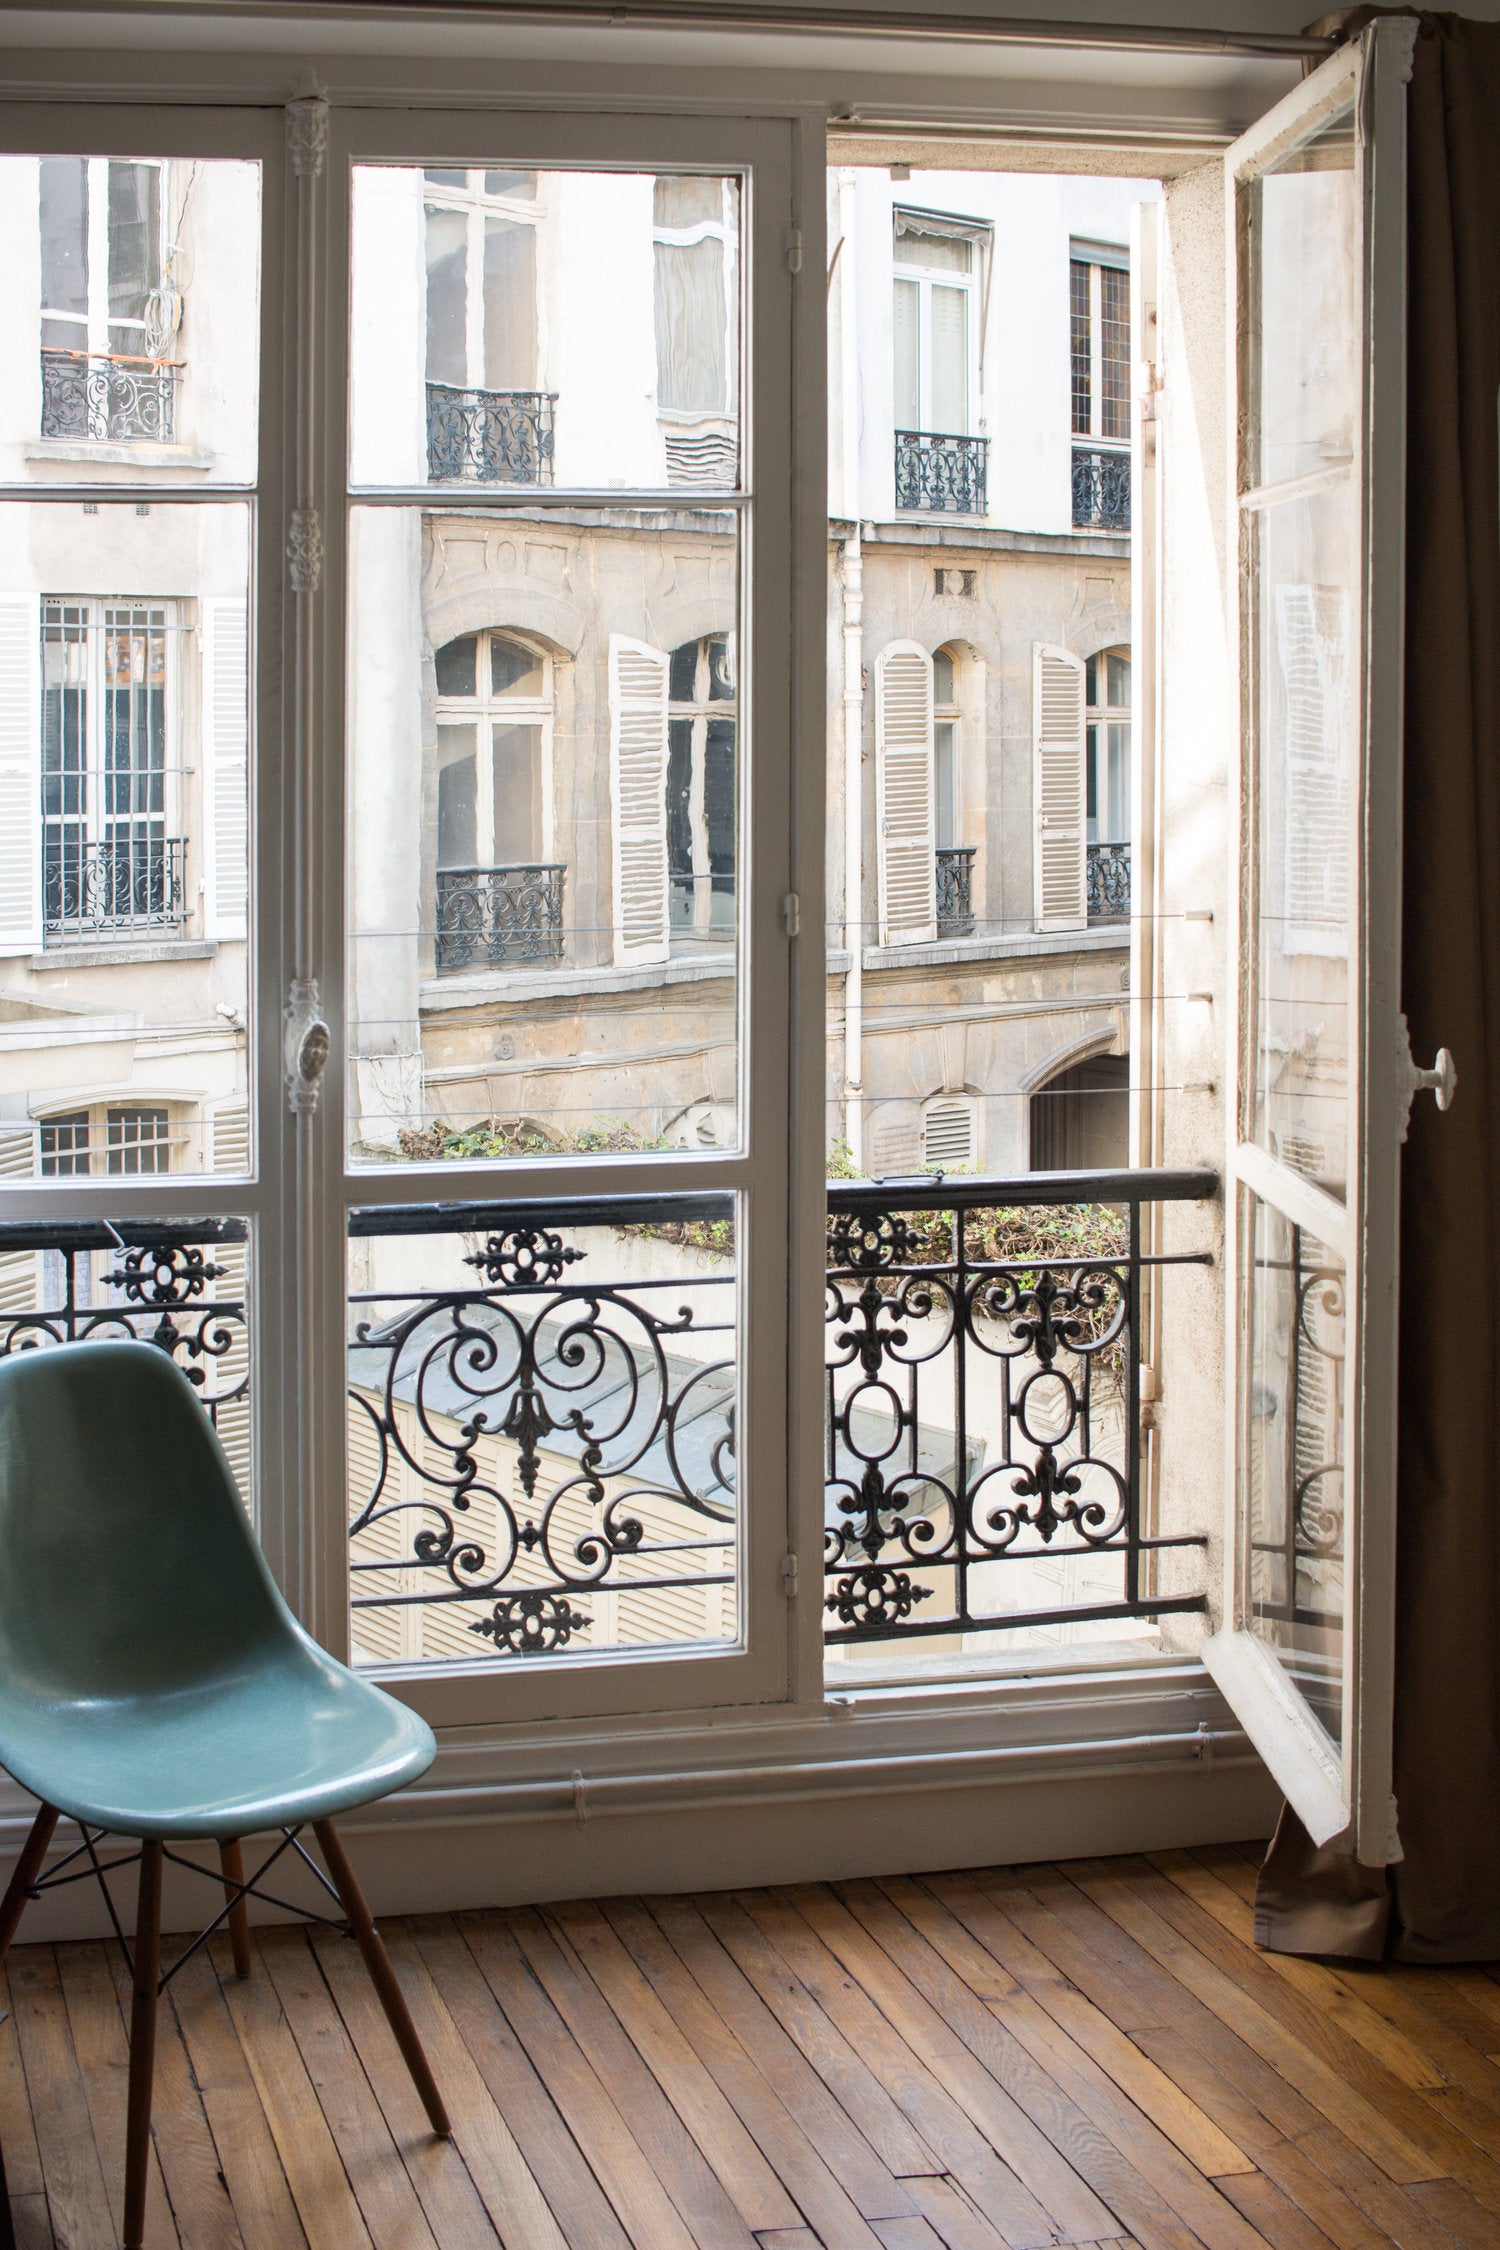 Morning Light in the Paris Apartment - Every Day Paris 